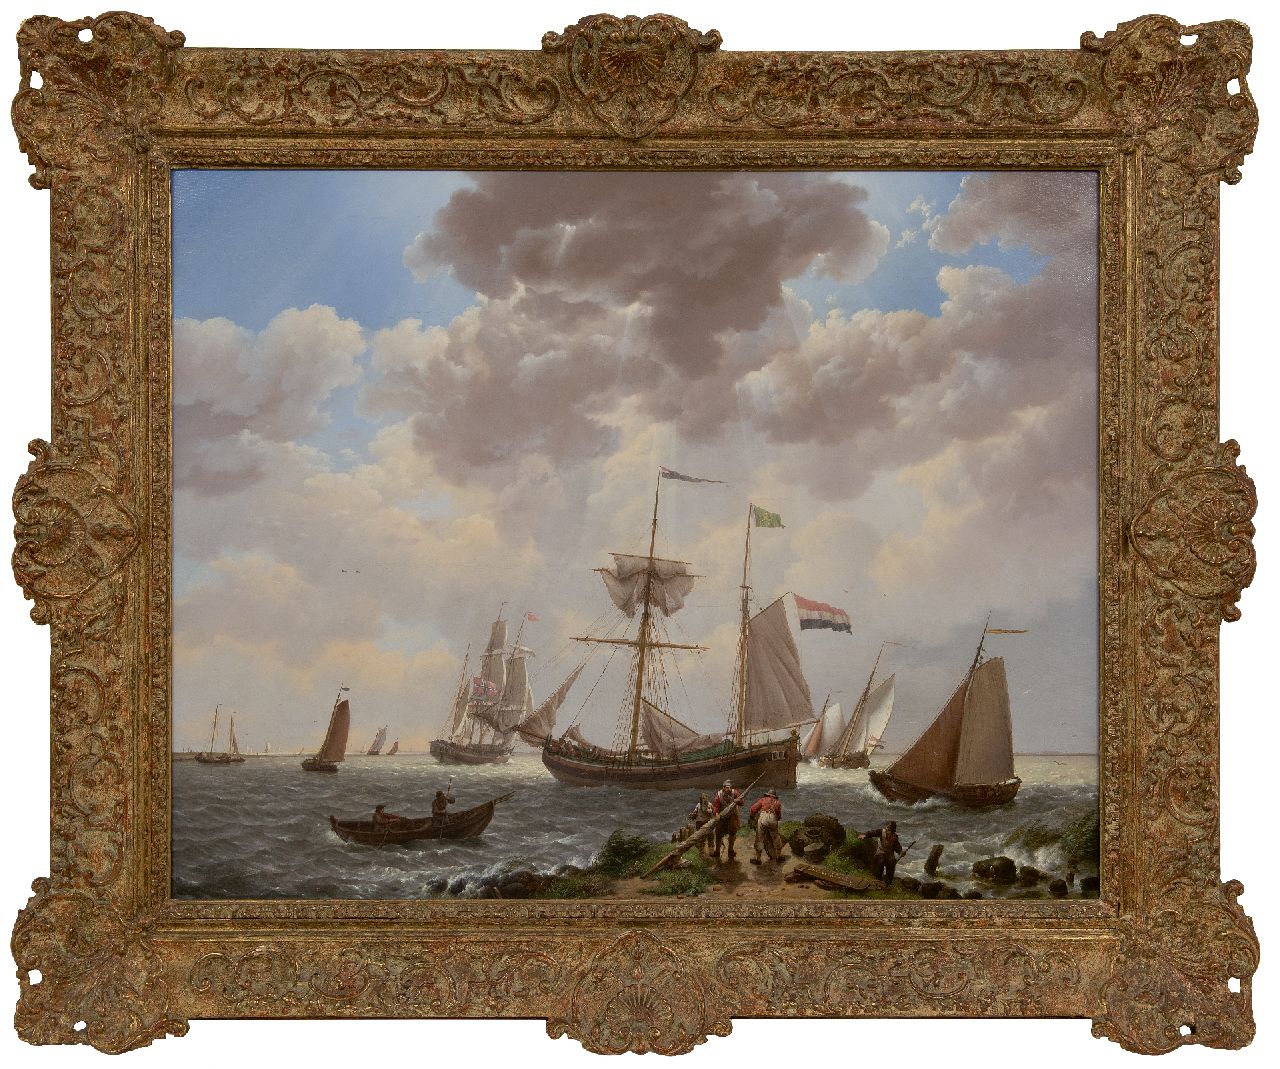 Koekkoek J.H.  | Johannes Hermanus Koekkoek | Paintings offered for sale | Shipping off the coast, oil on canvas 57.3 x 72.0 cm, signed l.r. and dated 1831